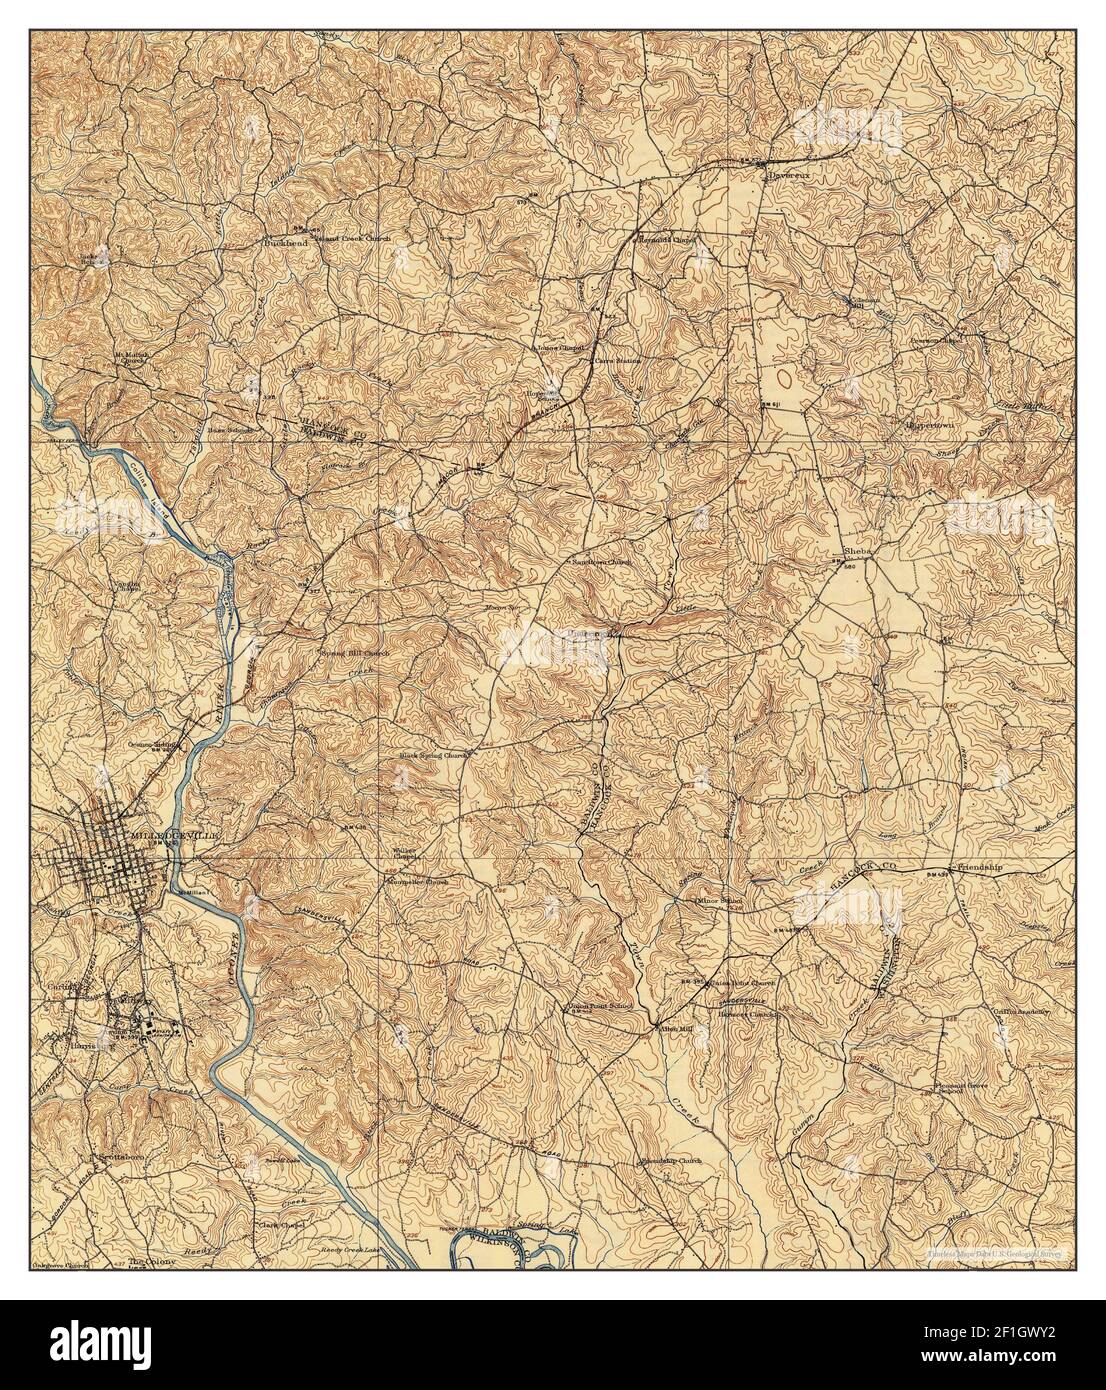 Milledgeville, Georgia, map 1912, 1:62500, United States of America by Timeless Maps, data U.S. Geological Survey Stock Photo